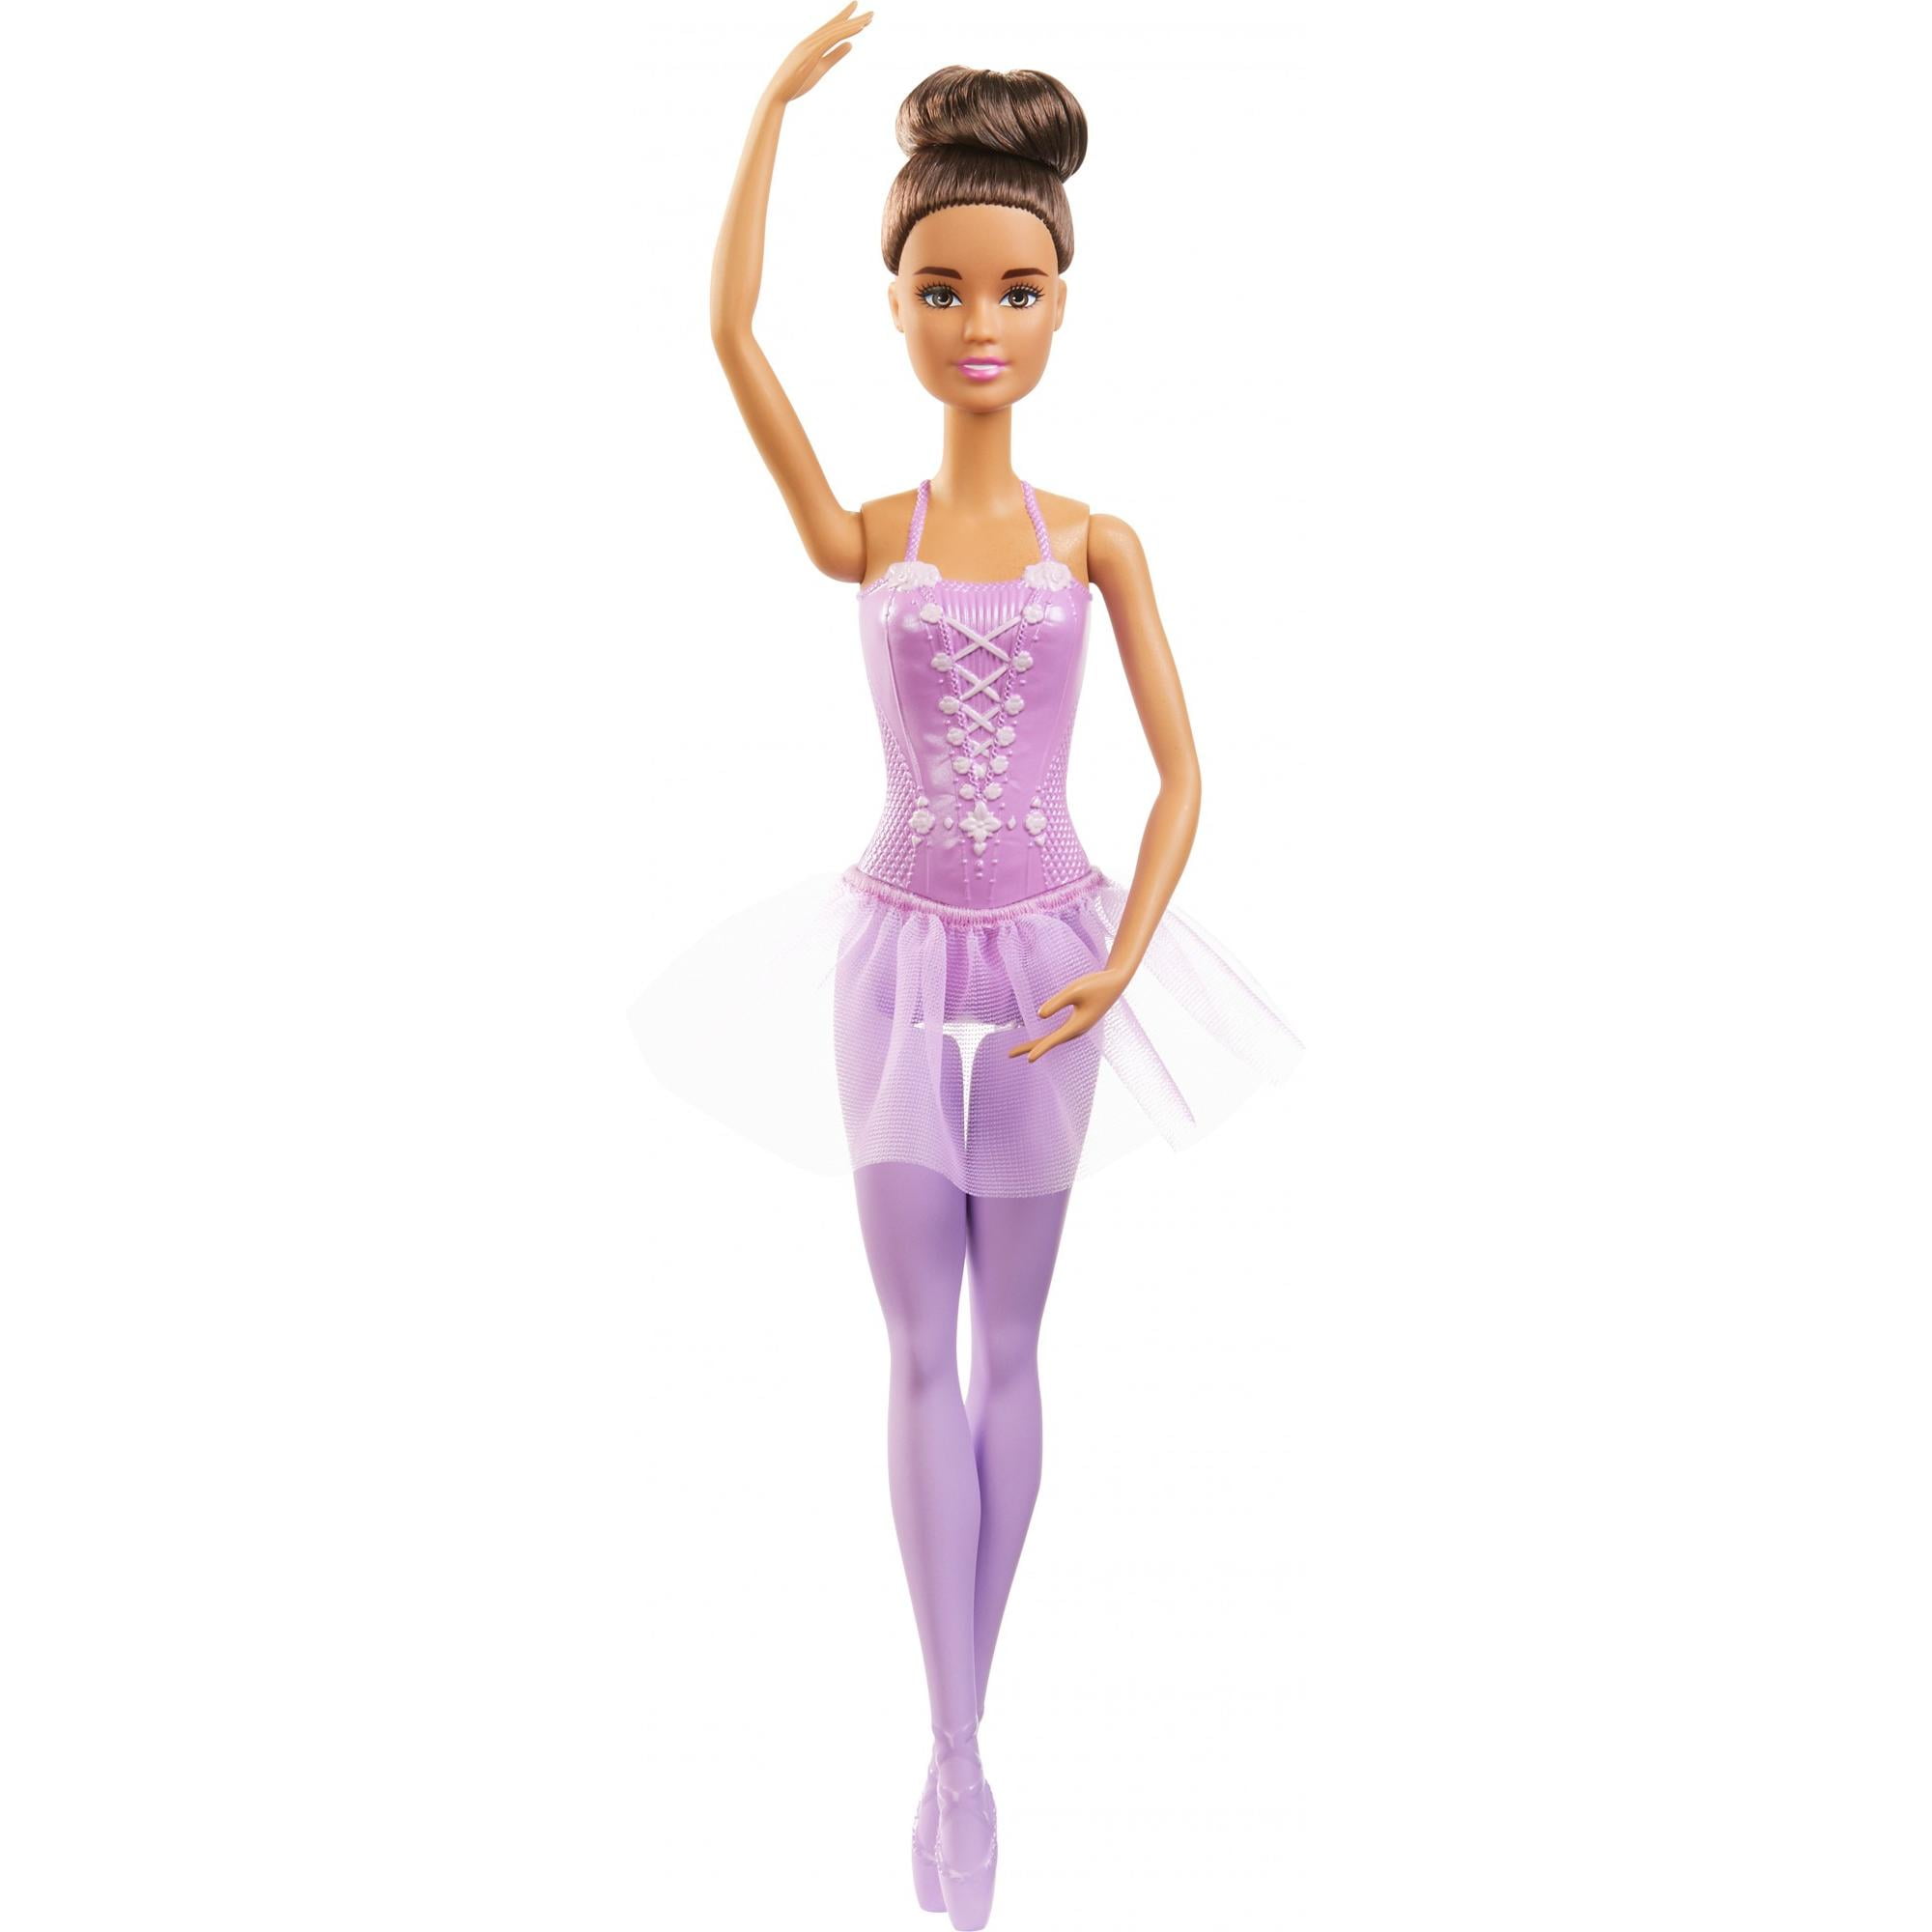 Barbie Fairytale Ballerina "You Can Be Anything" 12" Dolls ~ Set of 3 2016 